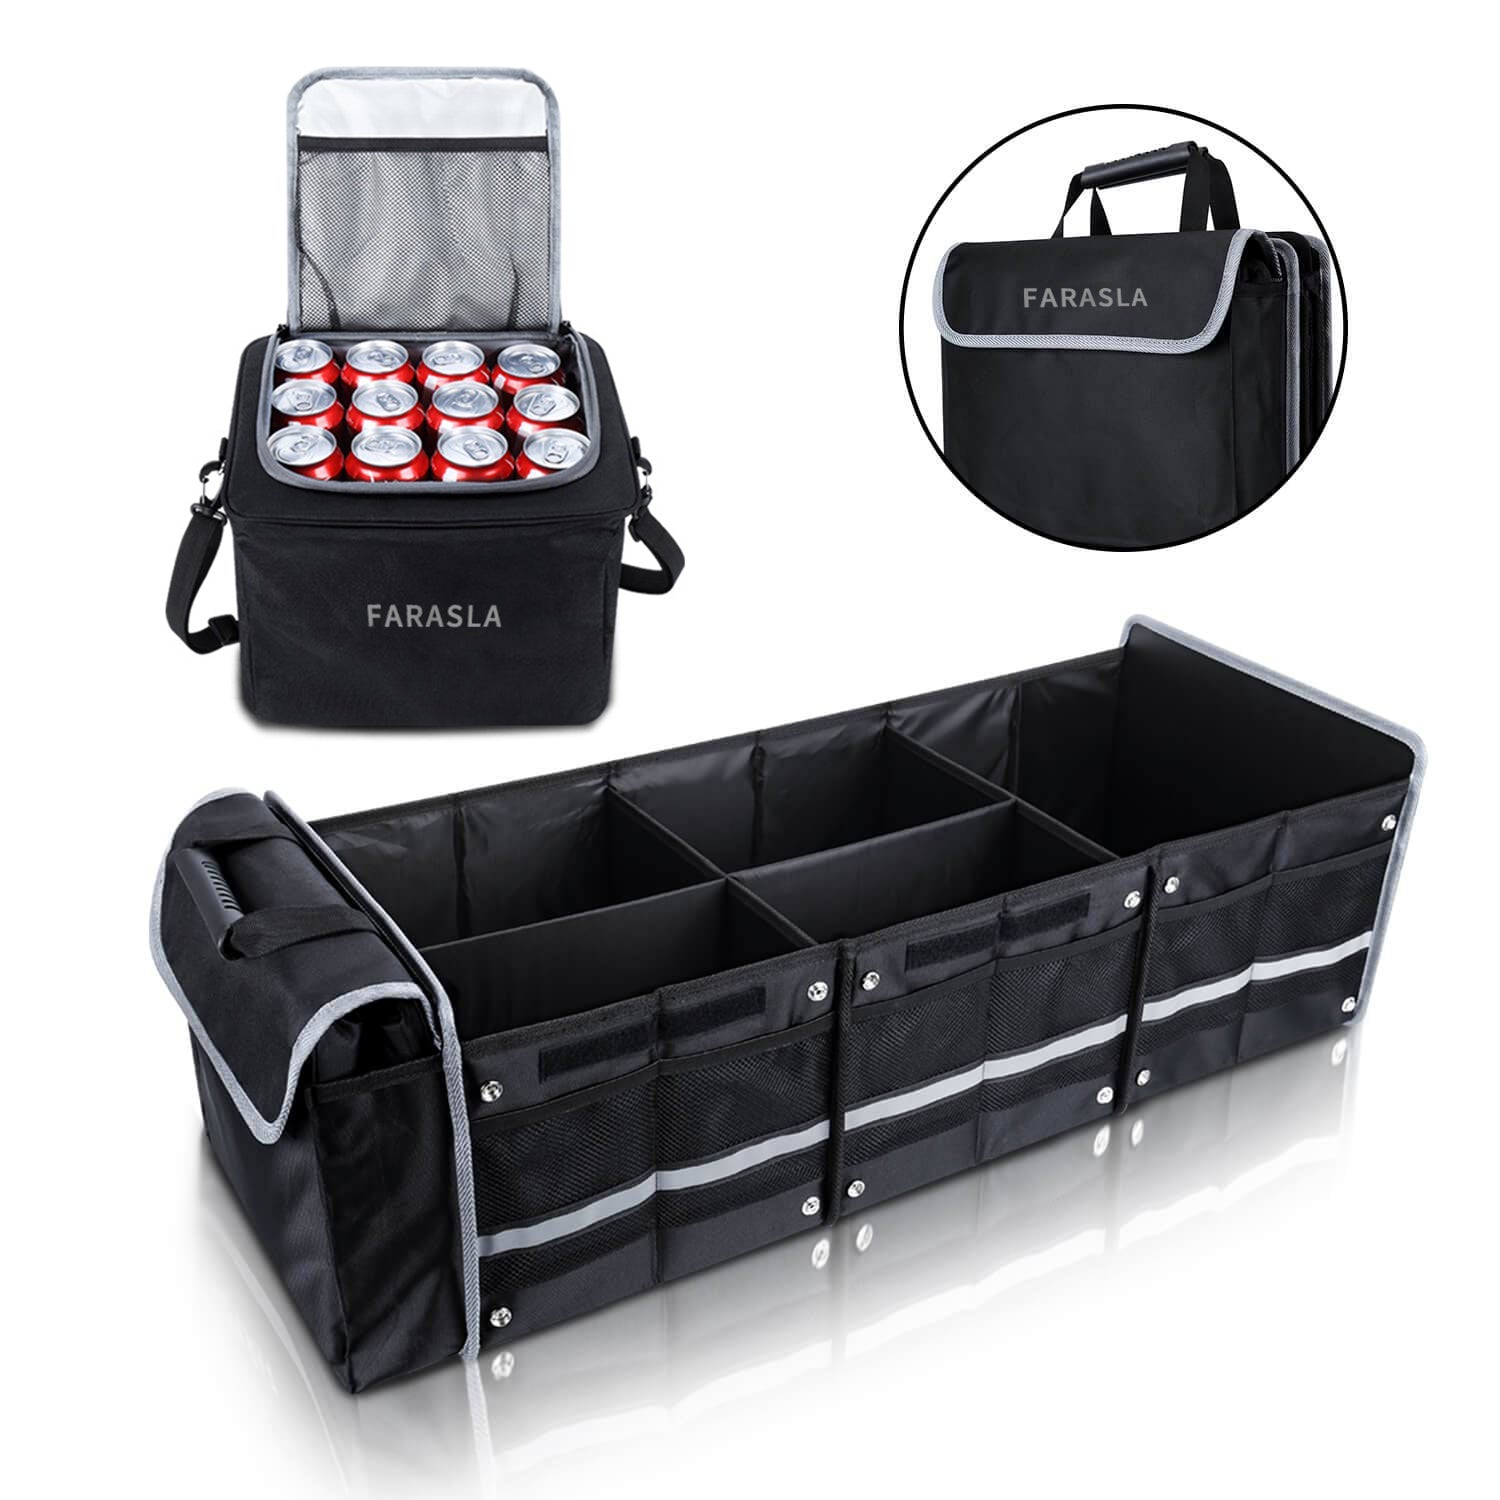 MaxxHaul Collapsible Car Trunk Organizer Foldable with Non-Slip Bottom  50337 - The Home Depot